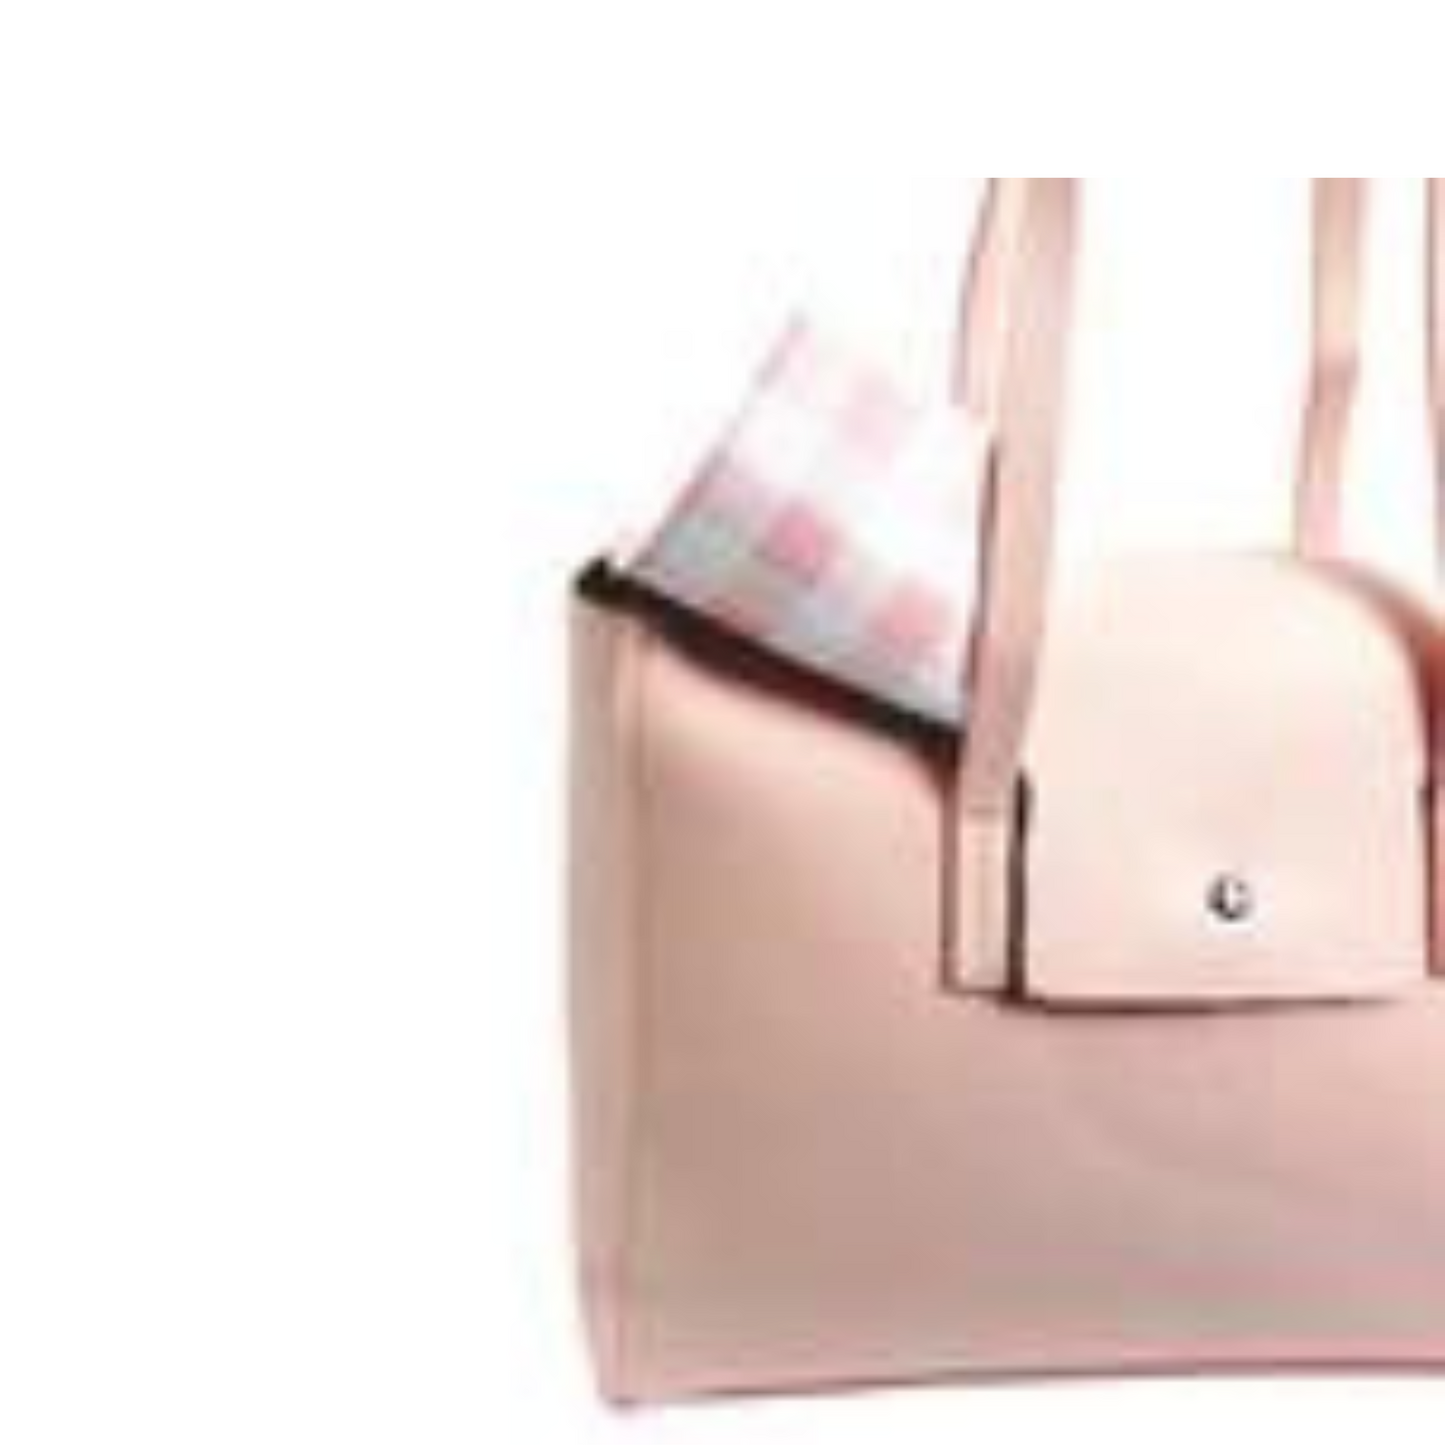 This attractive everyday tote gives you two colors to choose from: pink and blue. The gingham lining adds a stylish touch, making it perfect for any occasion. With plenty of room, it's a practical and fashionable way to go.